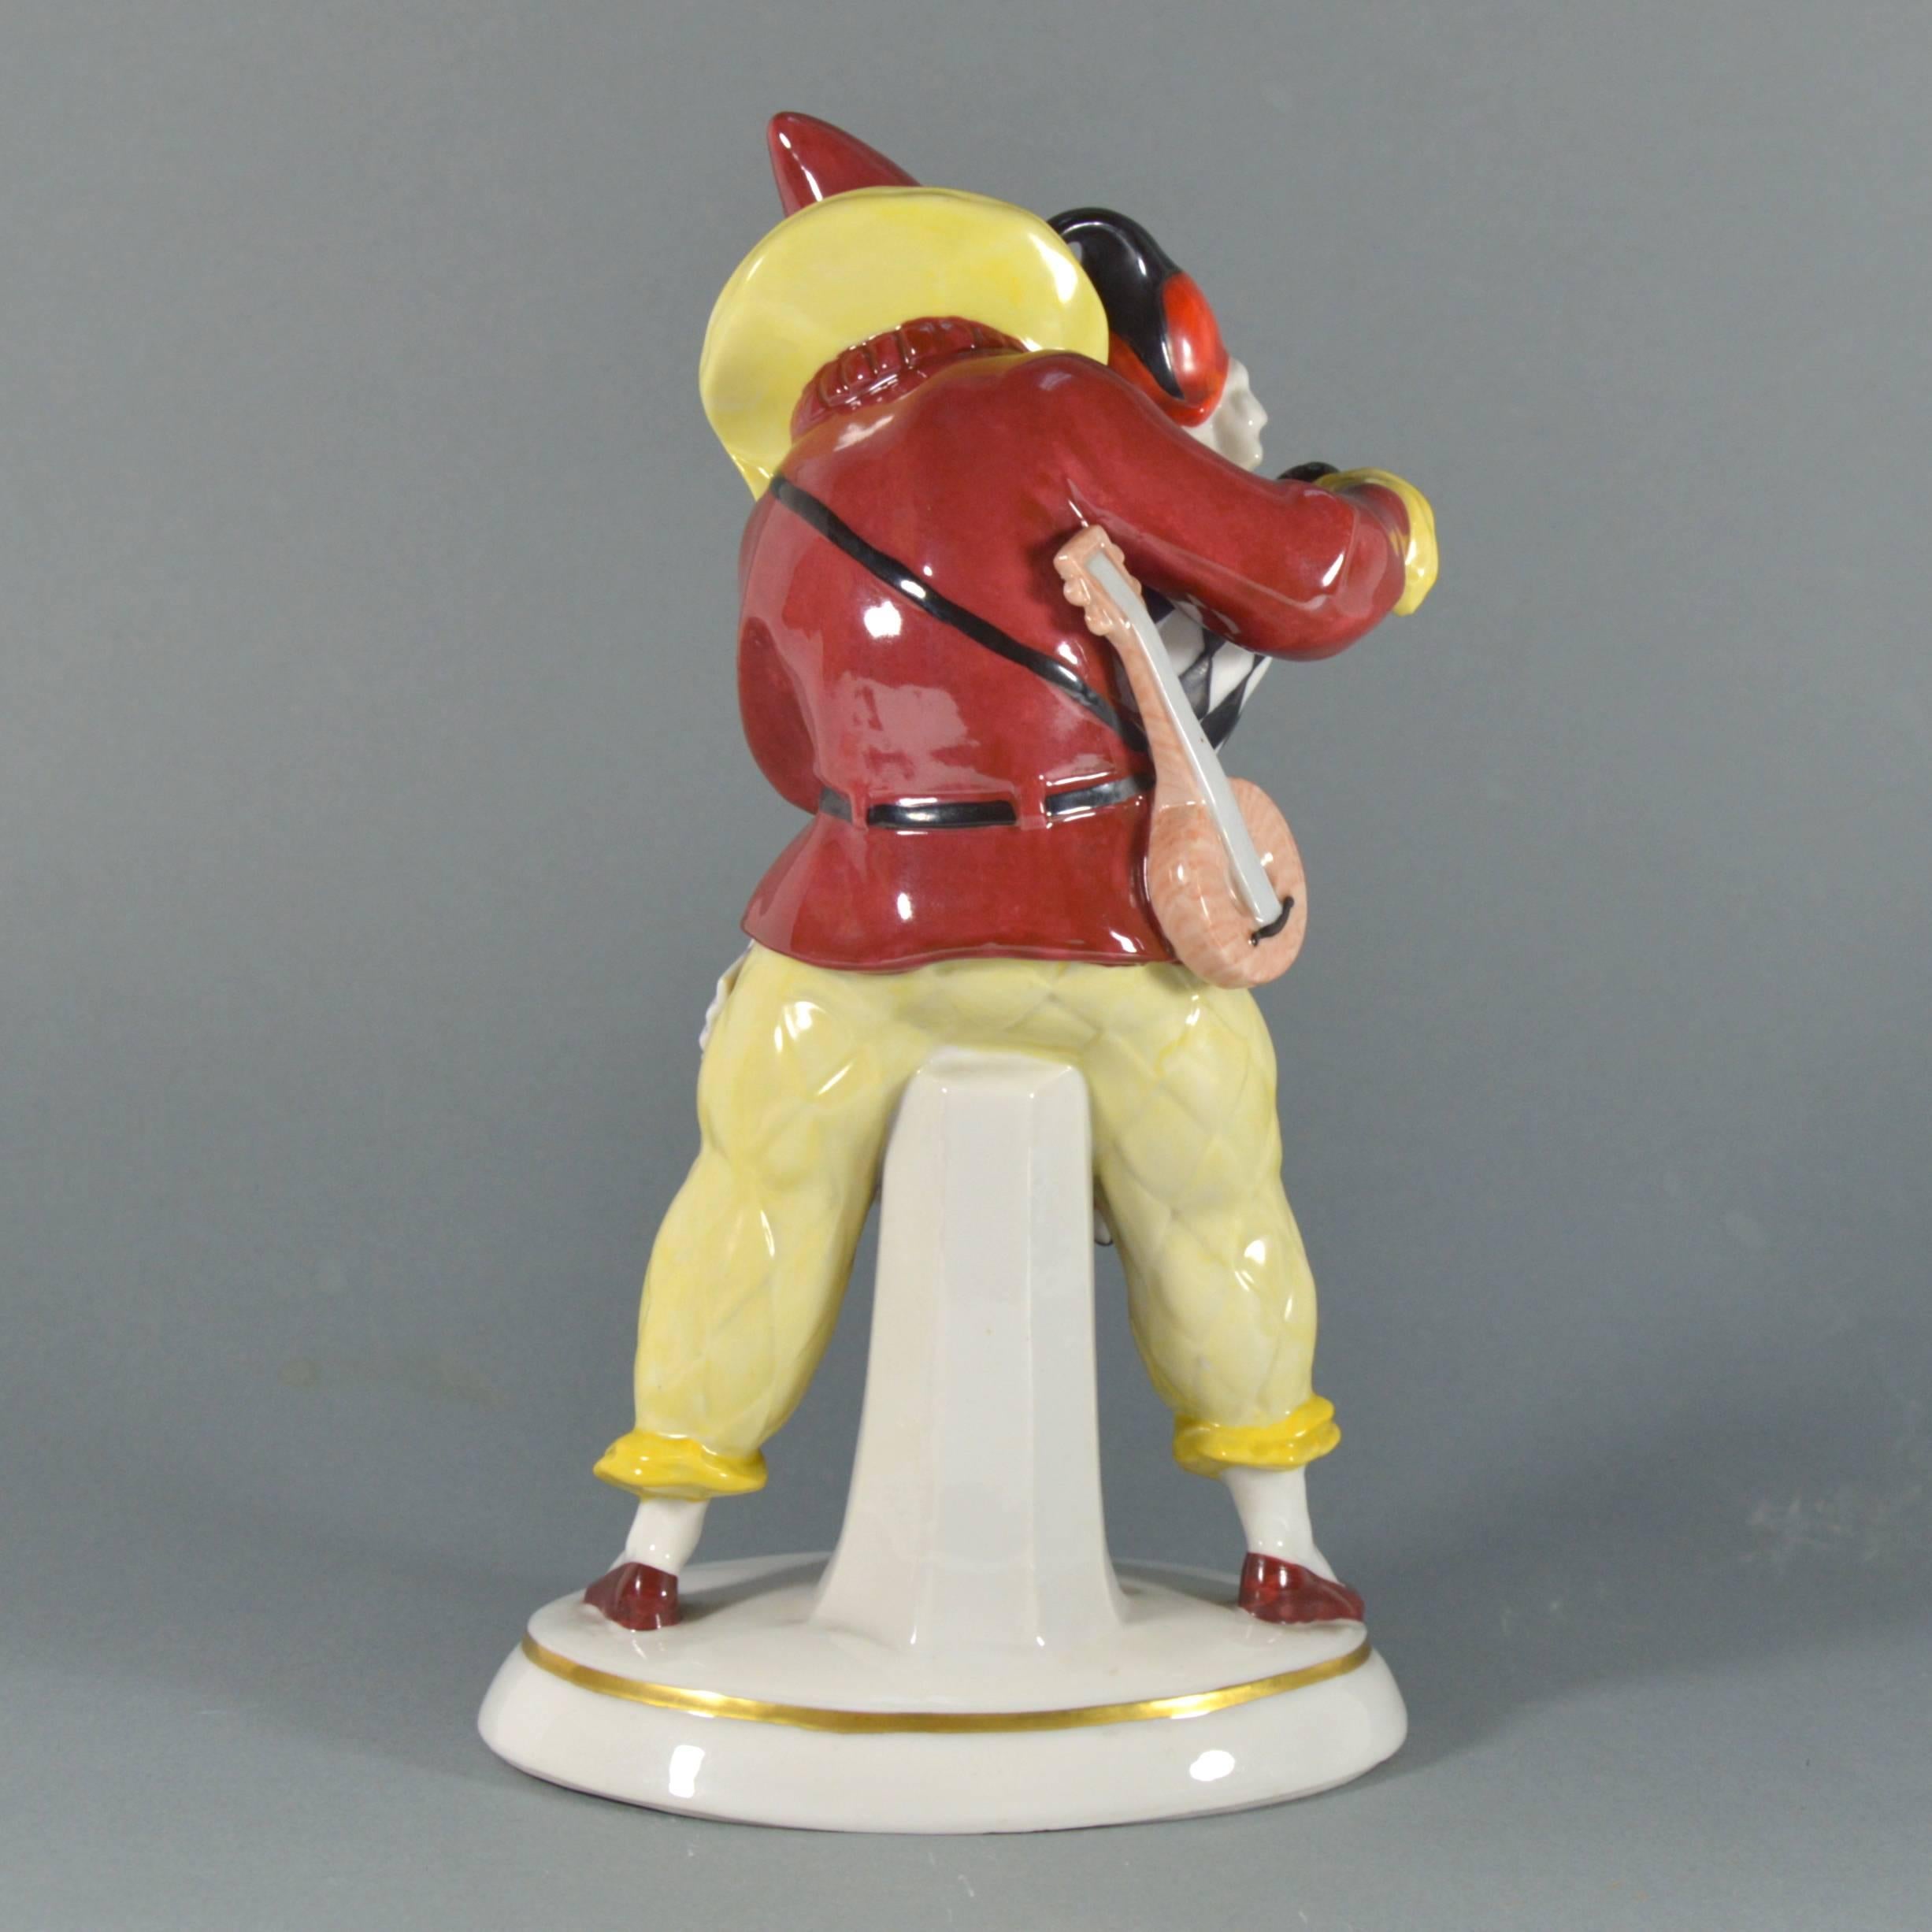 katzhutte figurines for sale